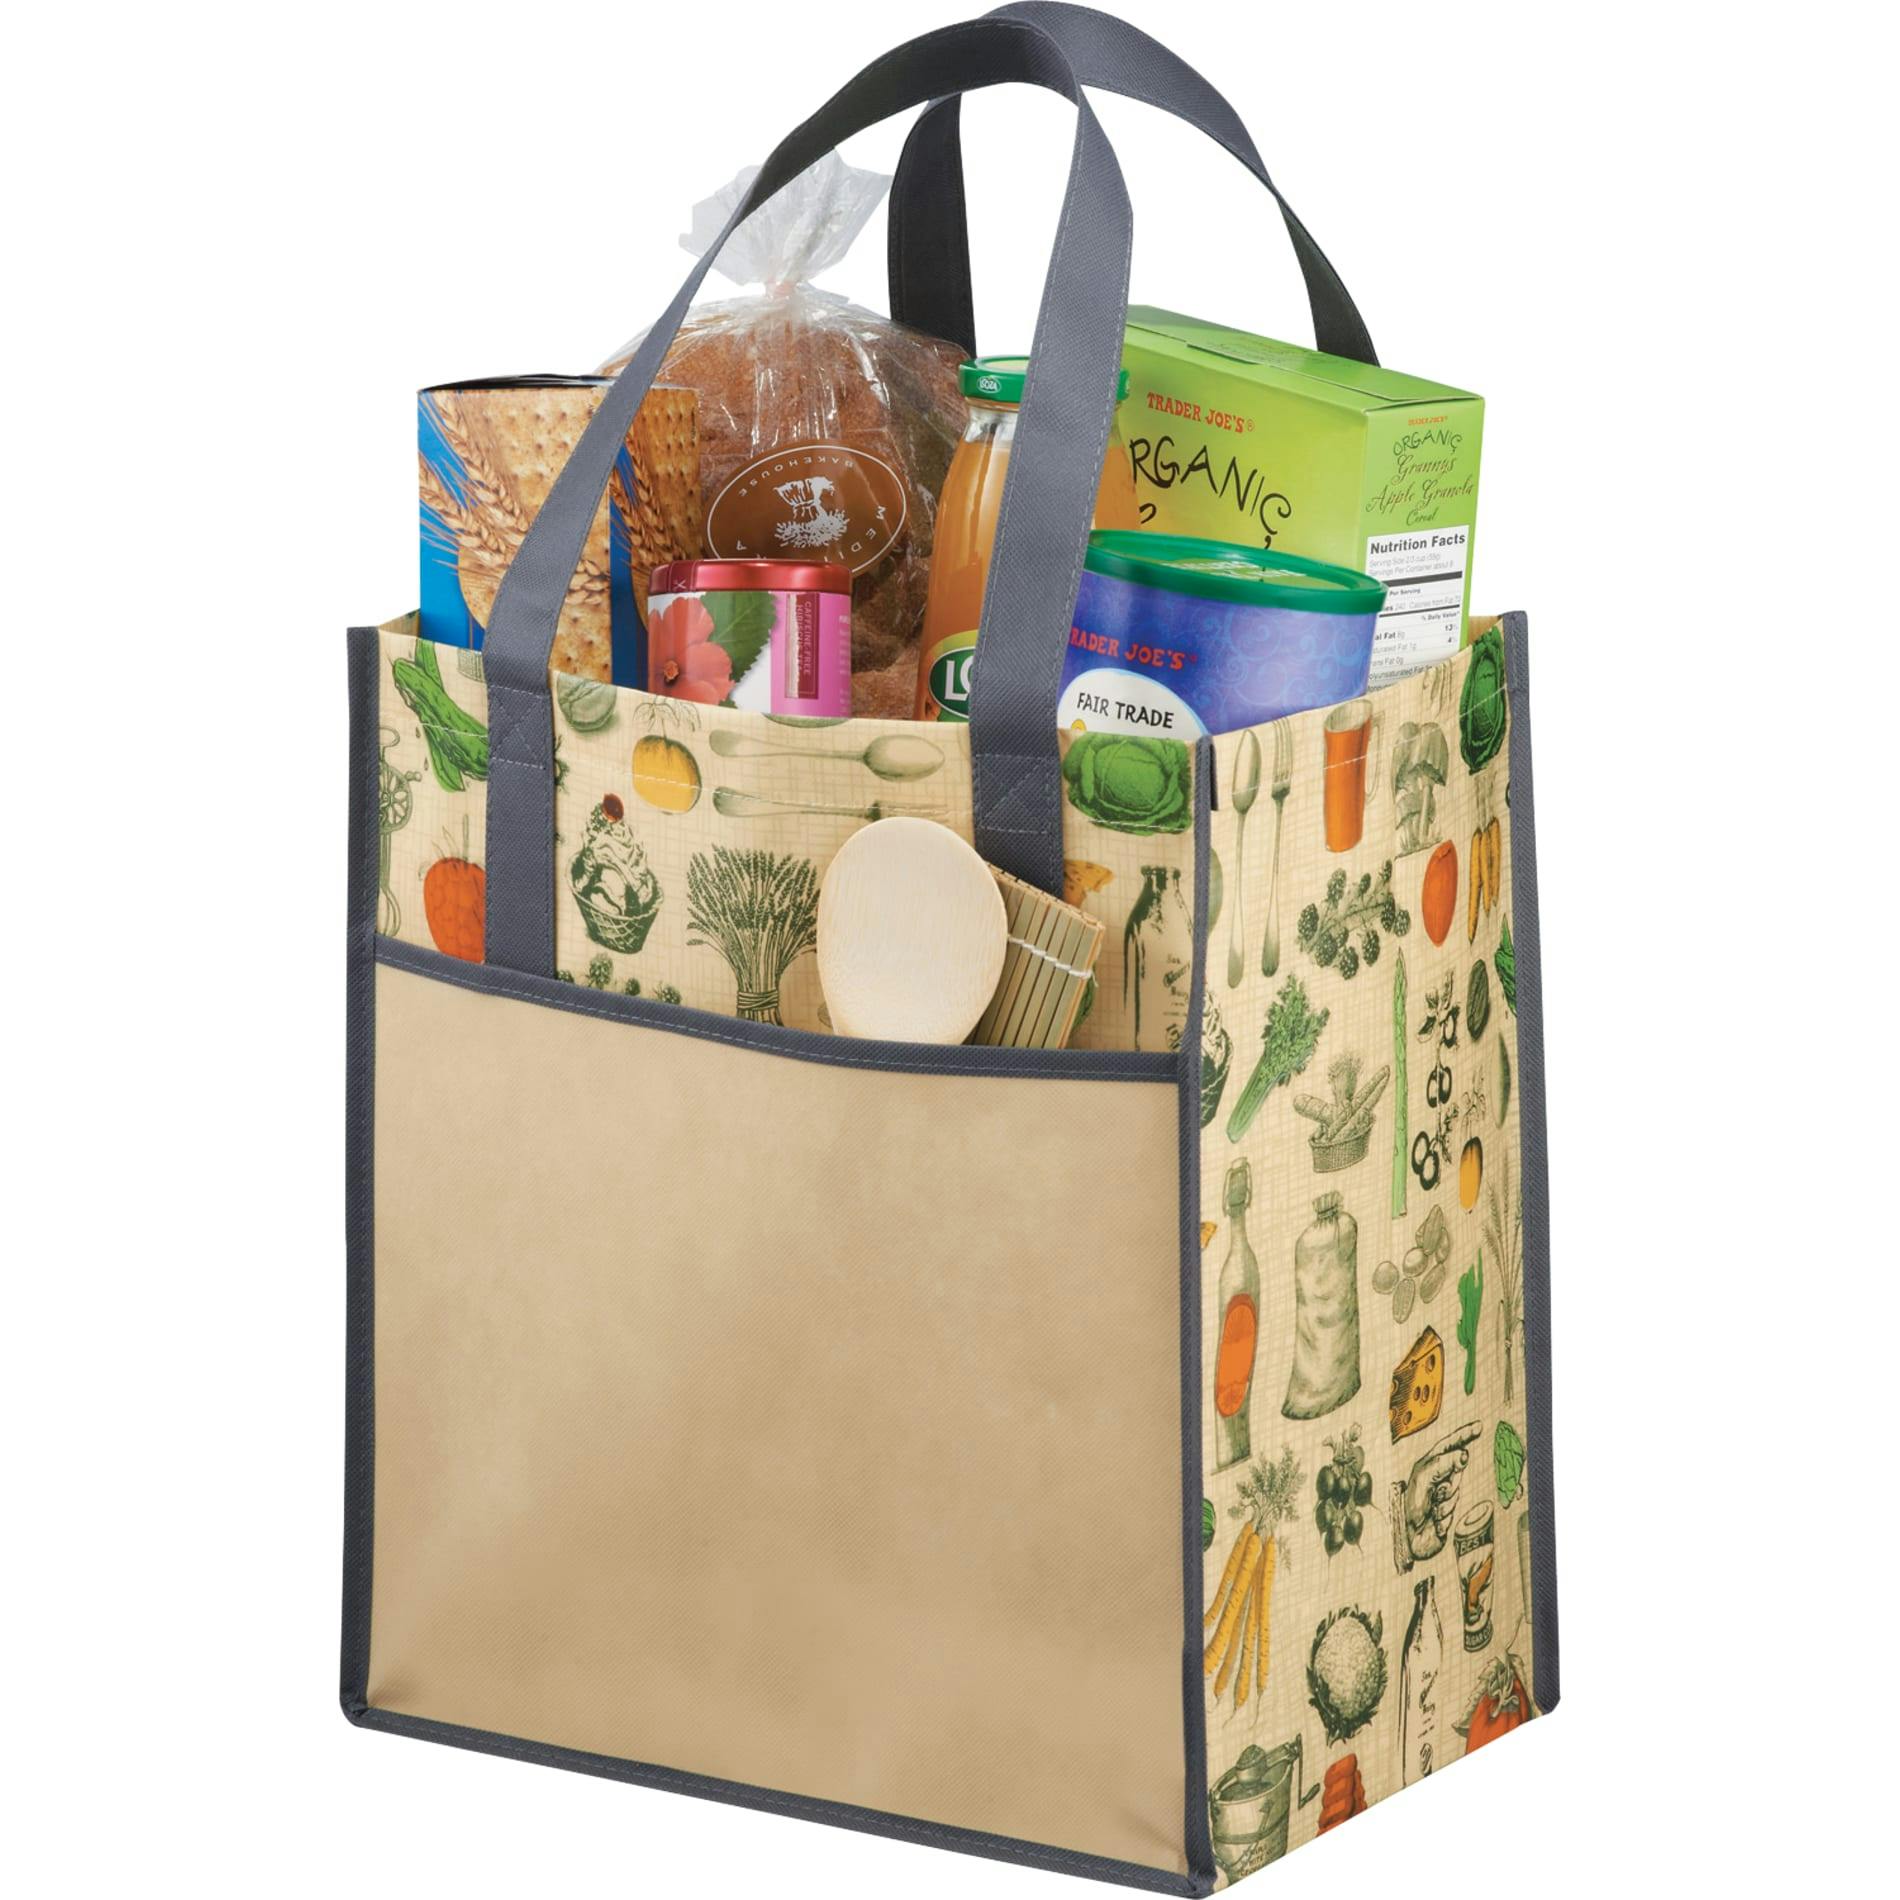 Big Grocery Vintage Laminated Non-Woven Tote - additional Image 2